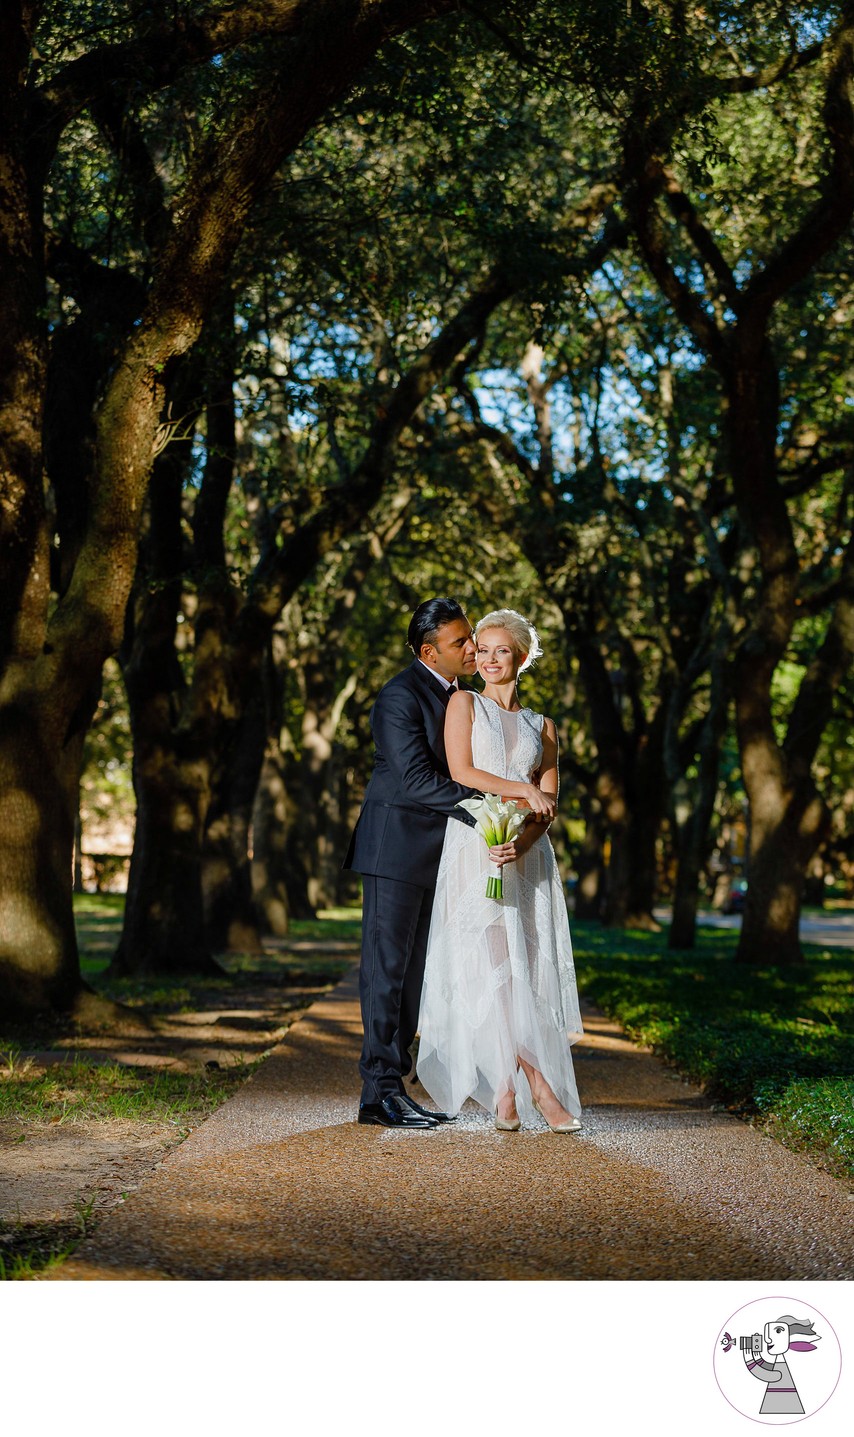 Bride and groom portrait in the park